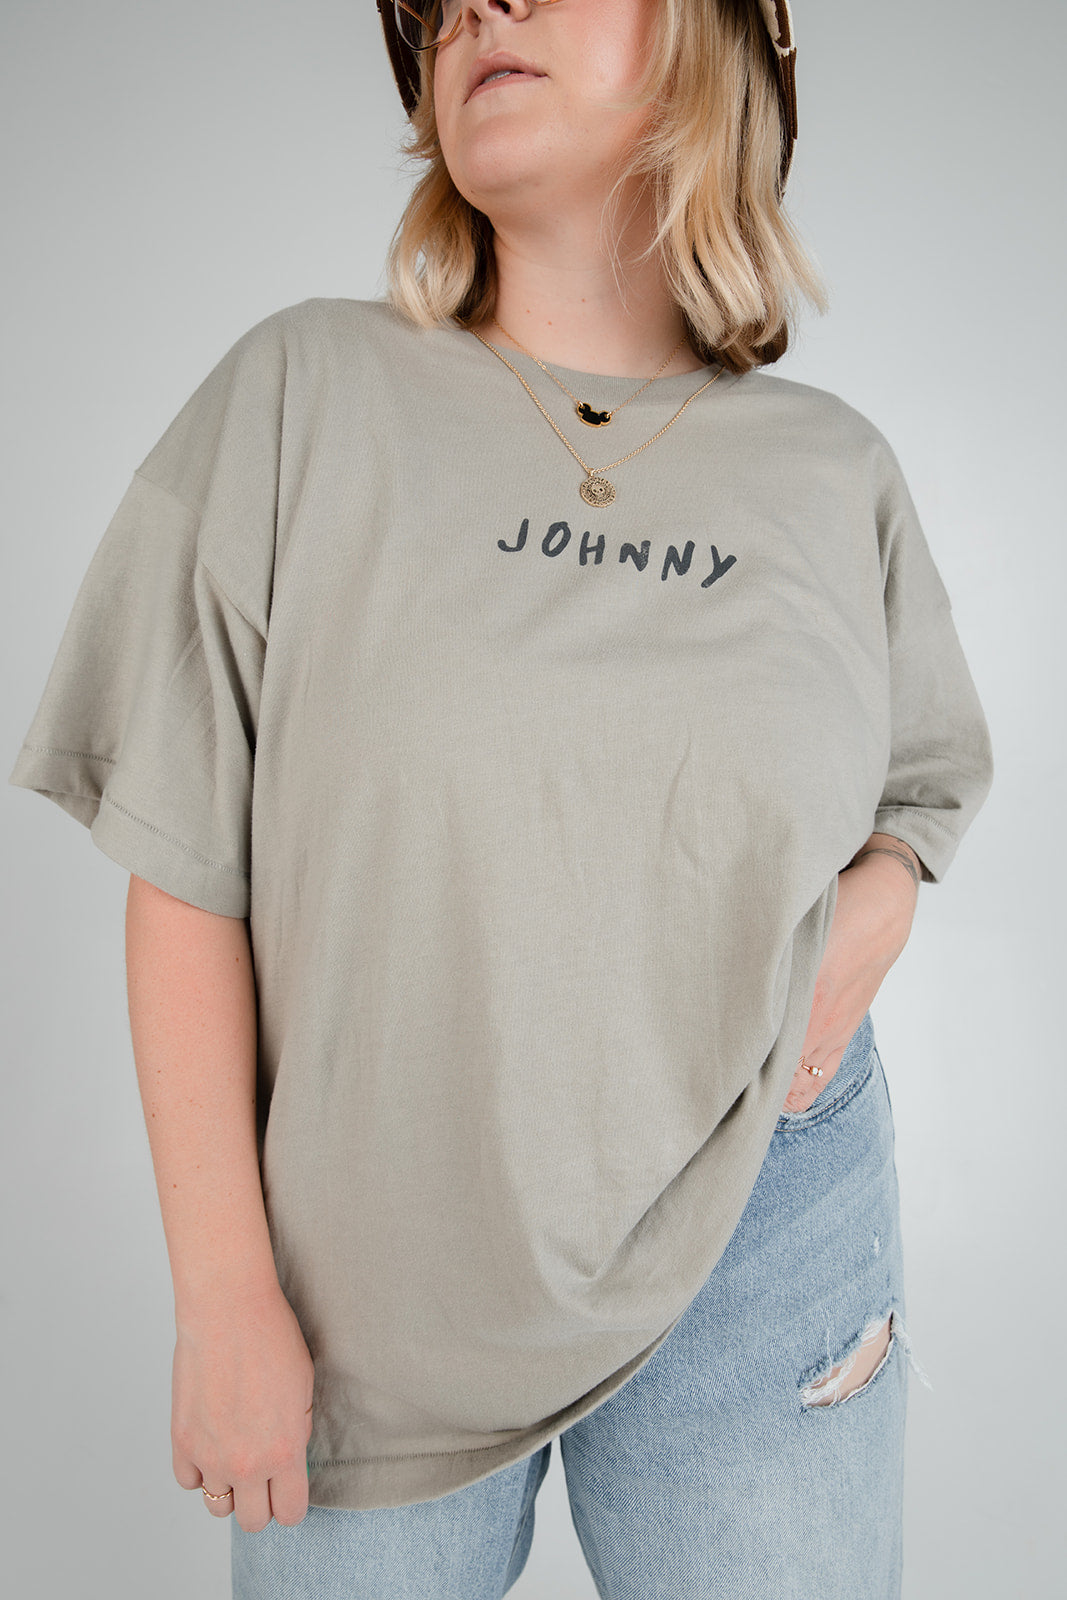 The Johnny Oversized Tee in Sage